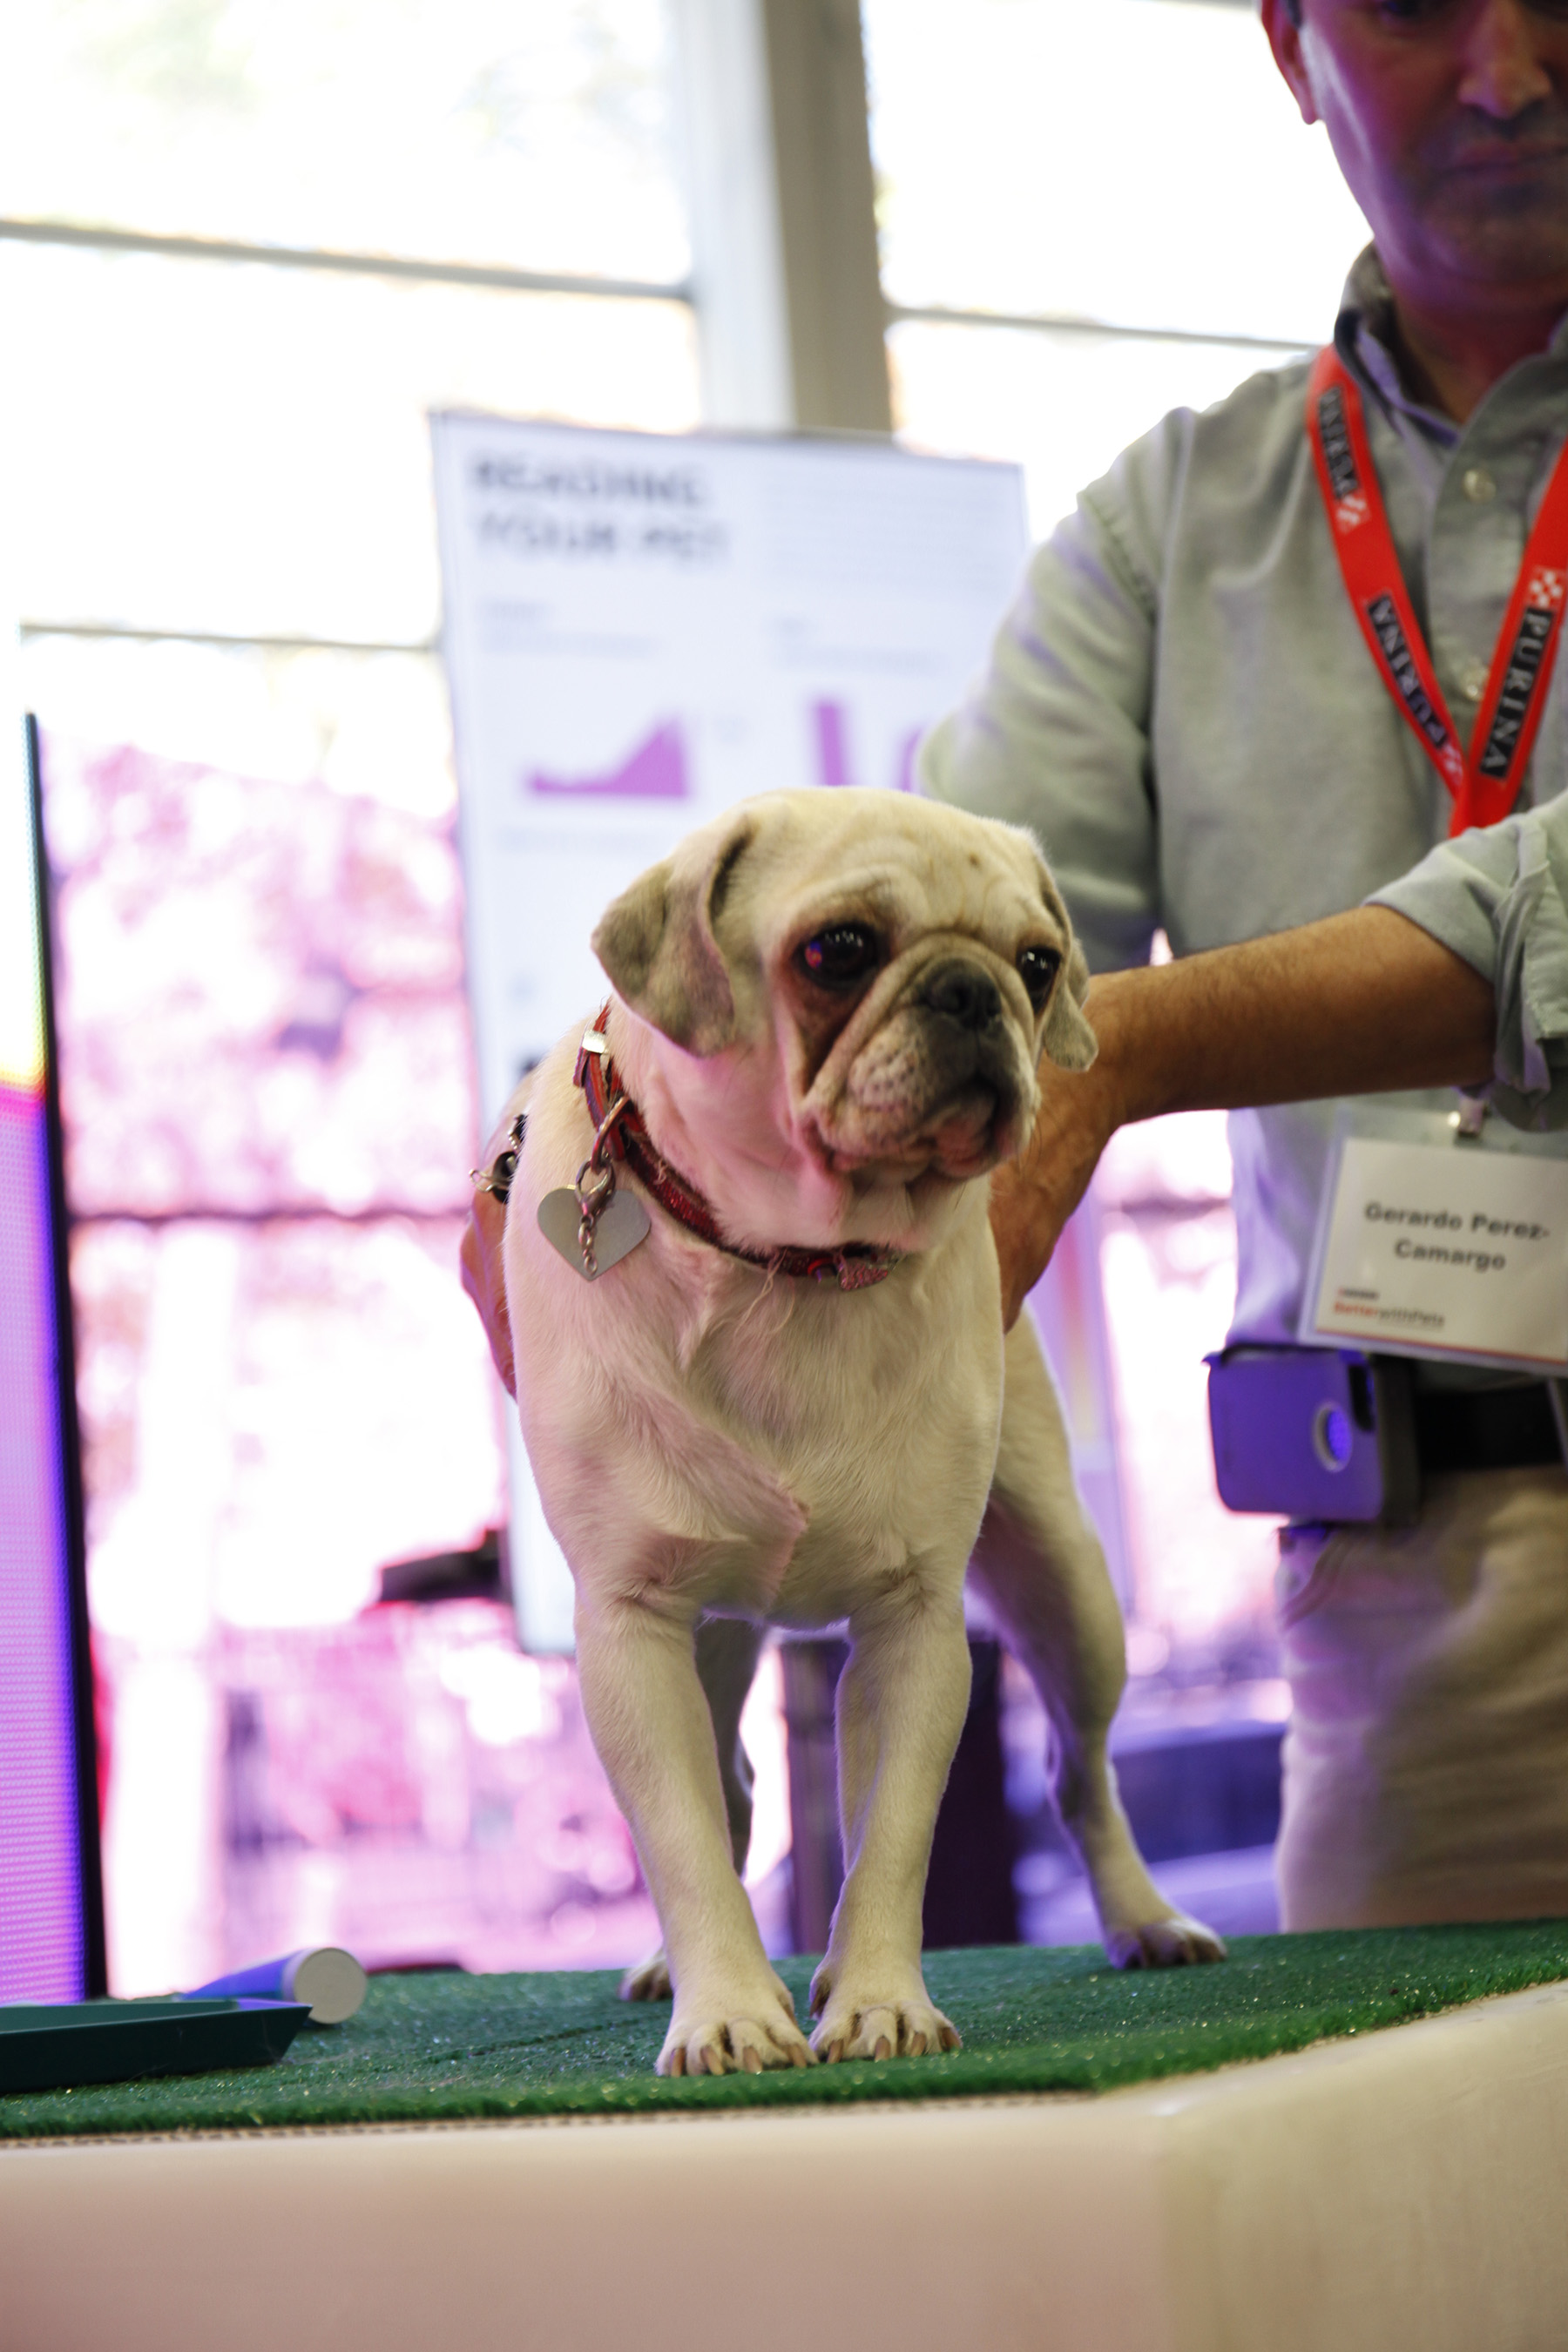 Stress levels of dogs were captured with thermal imaging at Purina’s Better With Pets Summit. Attendees had an opportunity to learn more about pet wellness through five experiential educational zones.